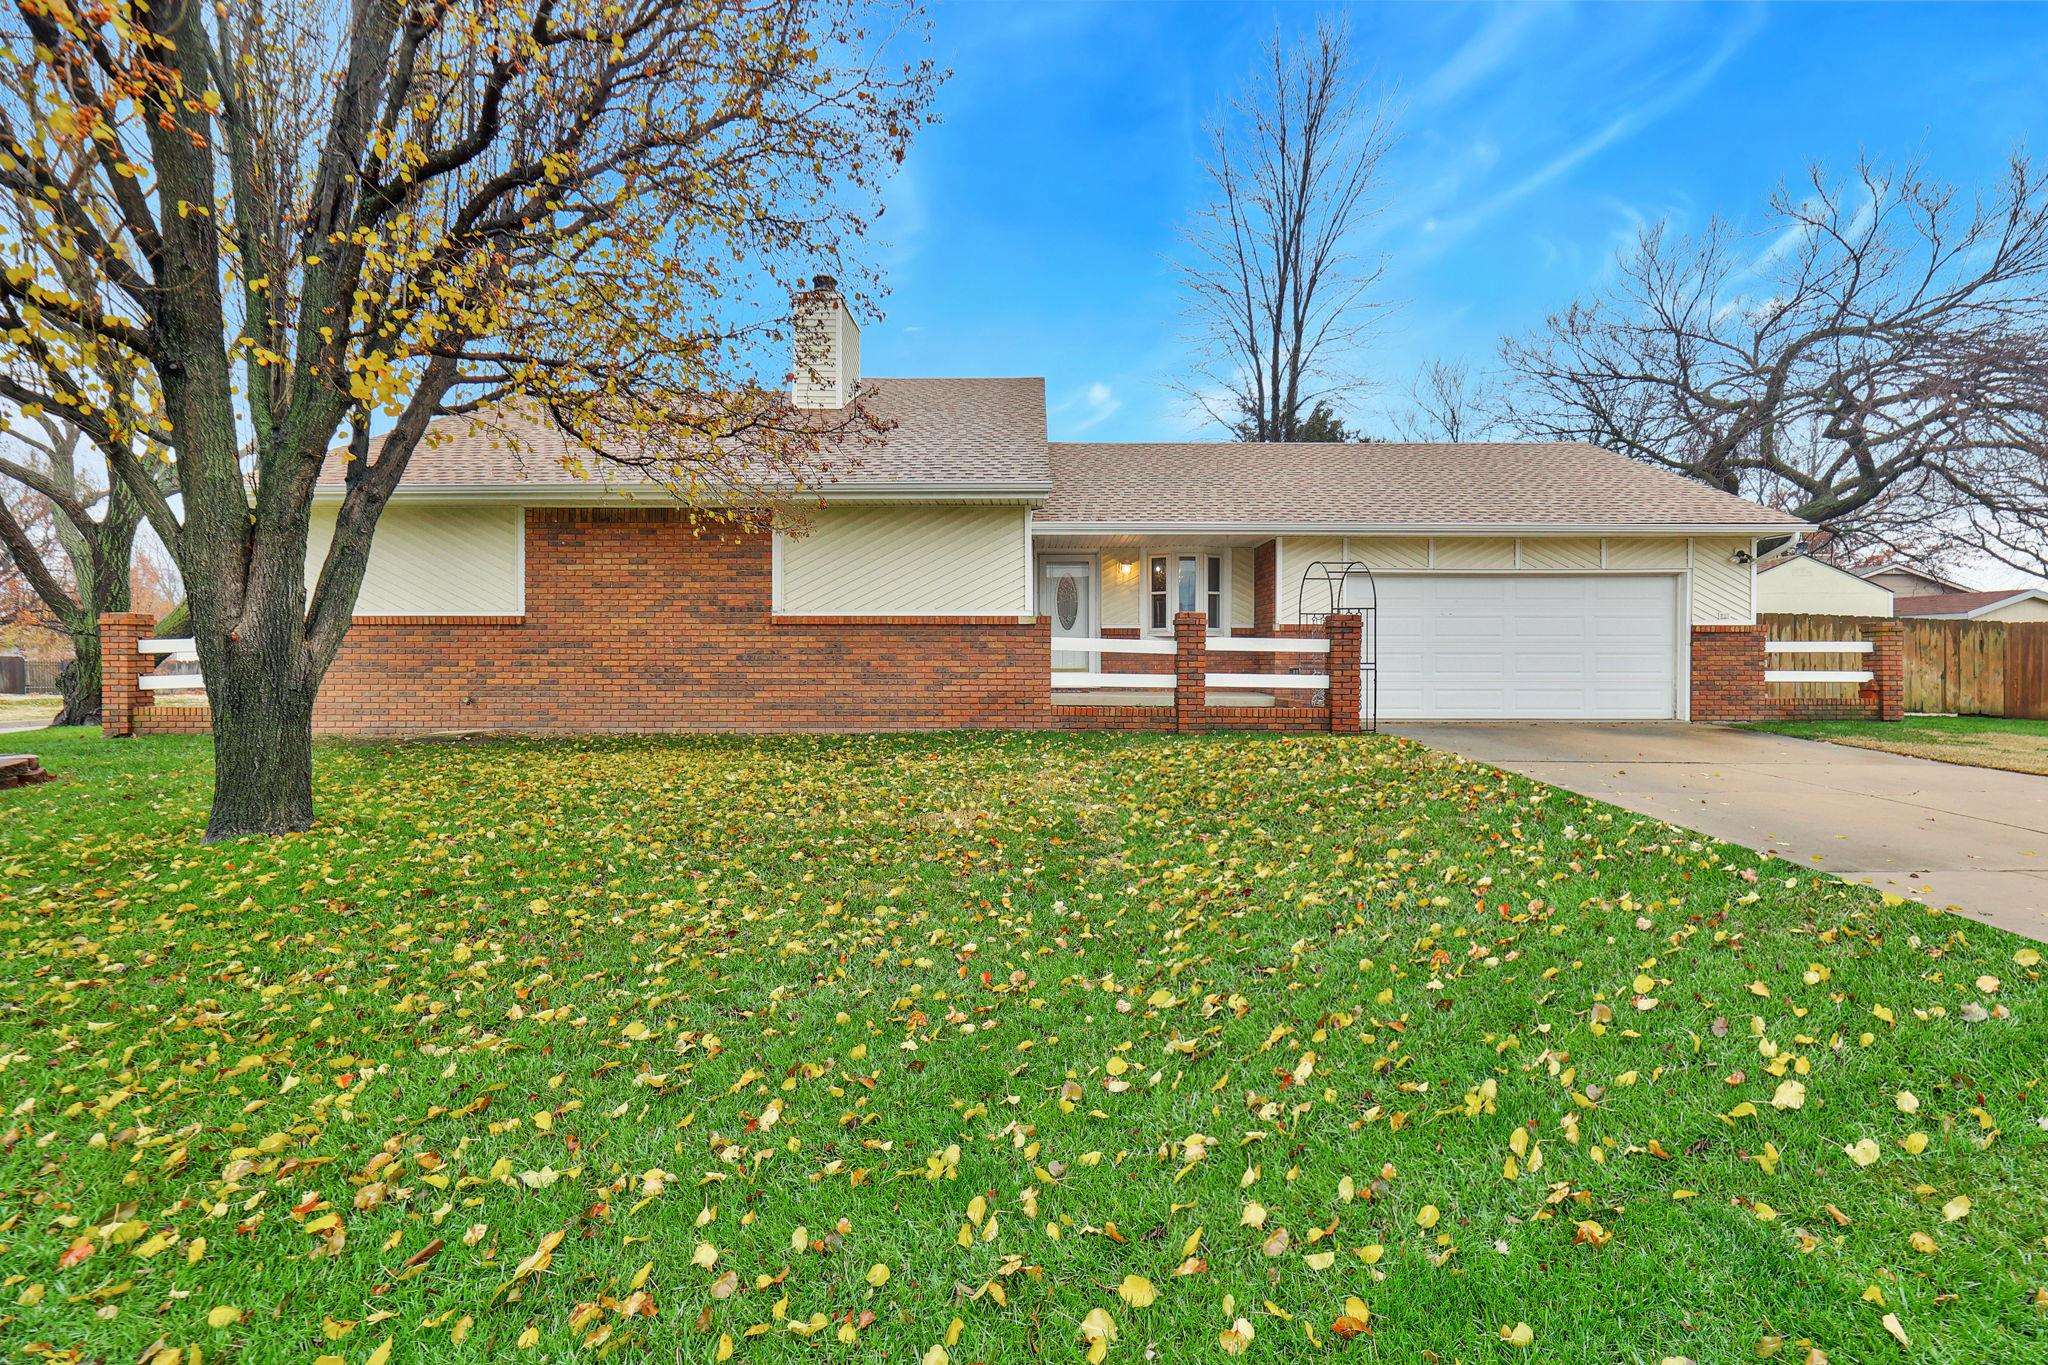 BEAUTIFULLY MAINTAINED AND SPACIOUS HOME ON QUIET CORNER LOT IN WEST WICHITA // VAULTED CEILINGS AND